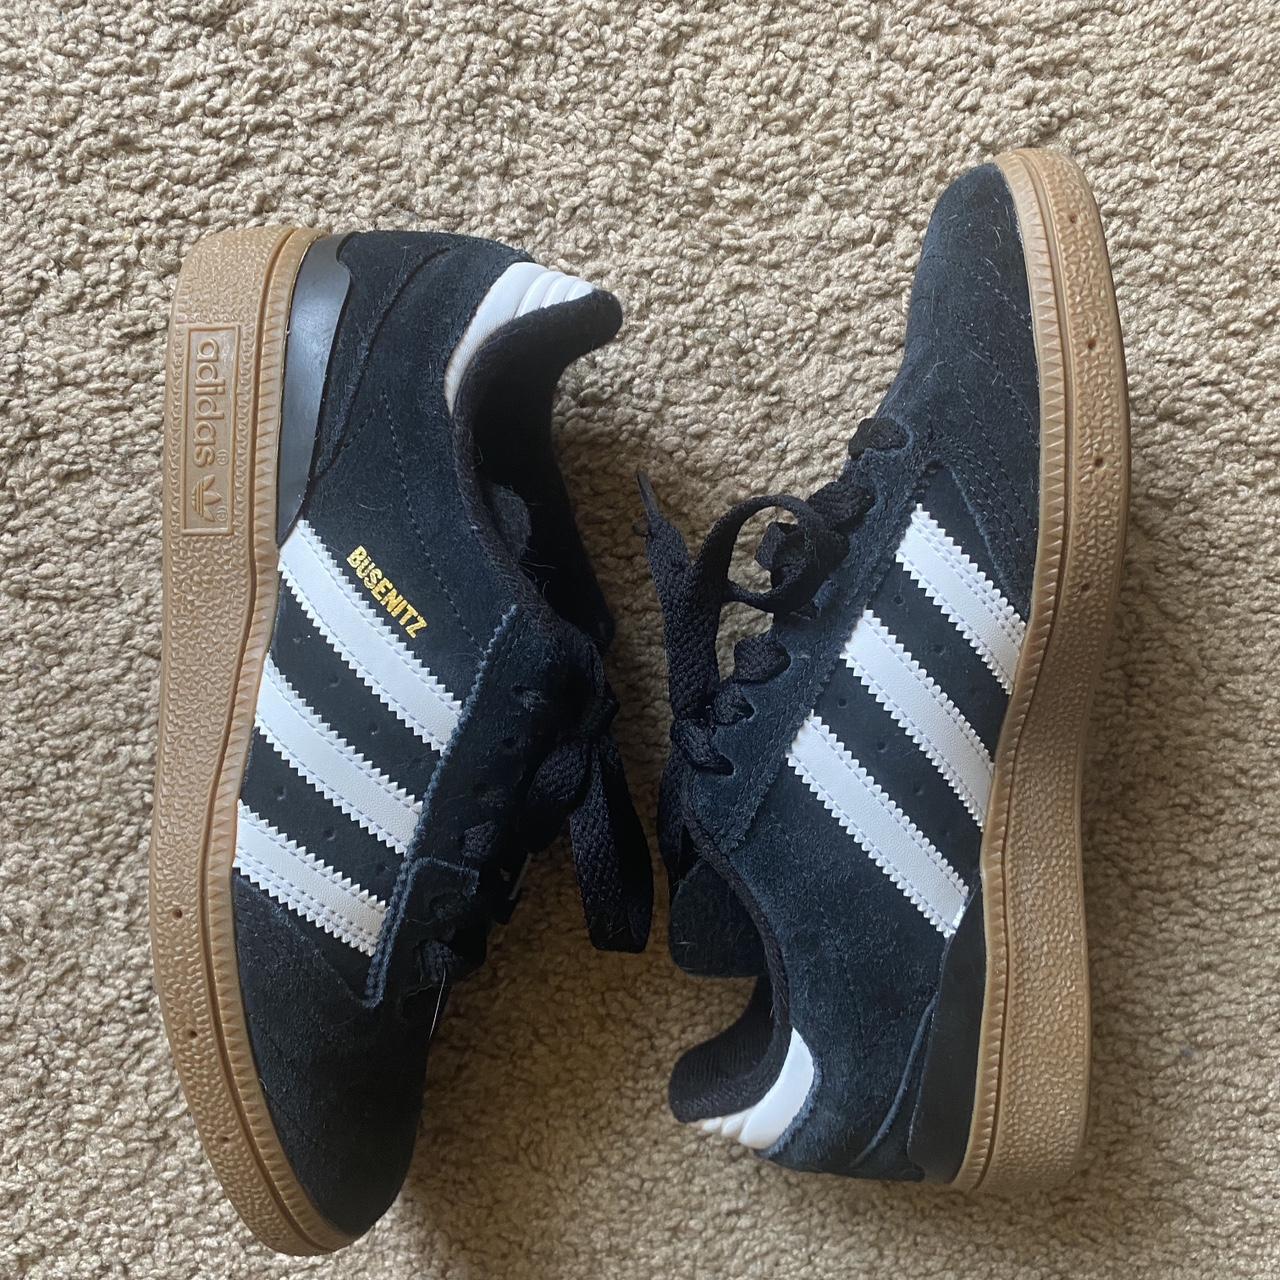 Adidas Women's Black and White Trainers | Depop